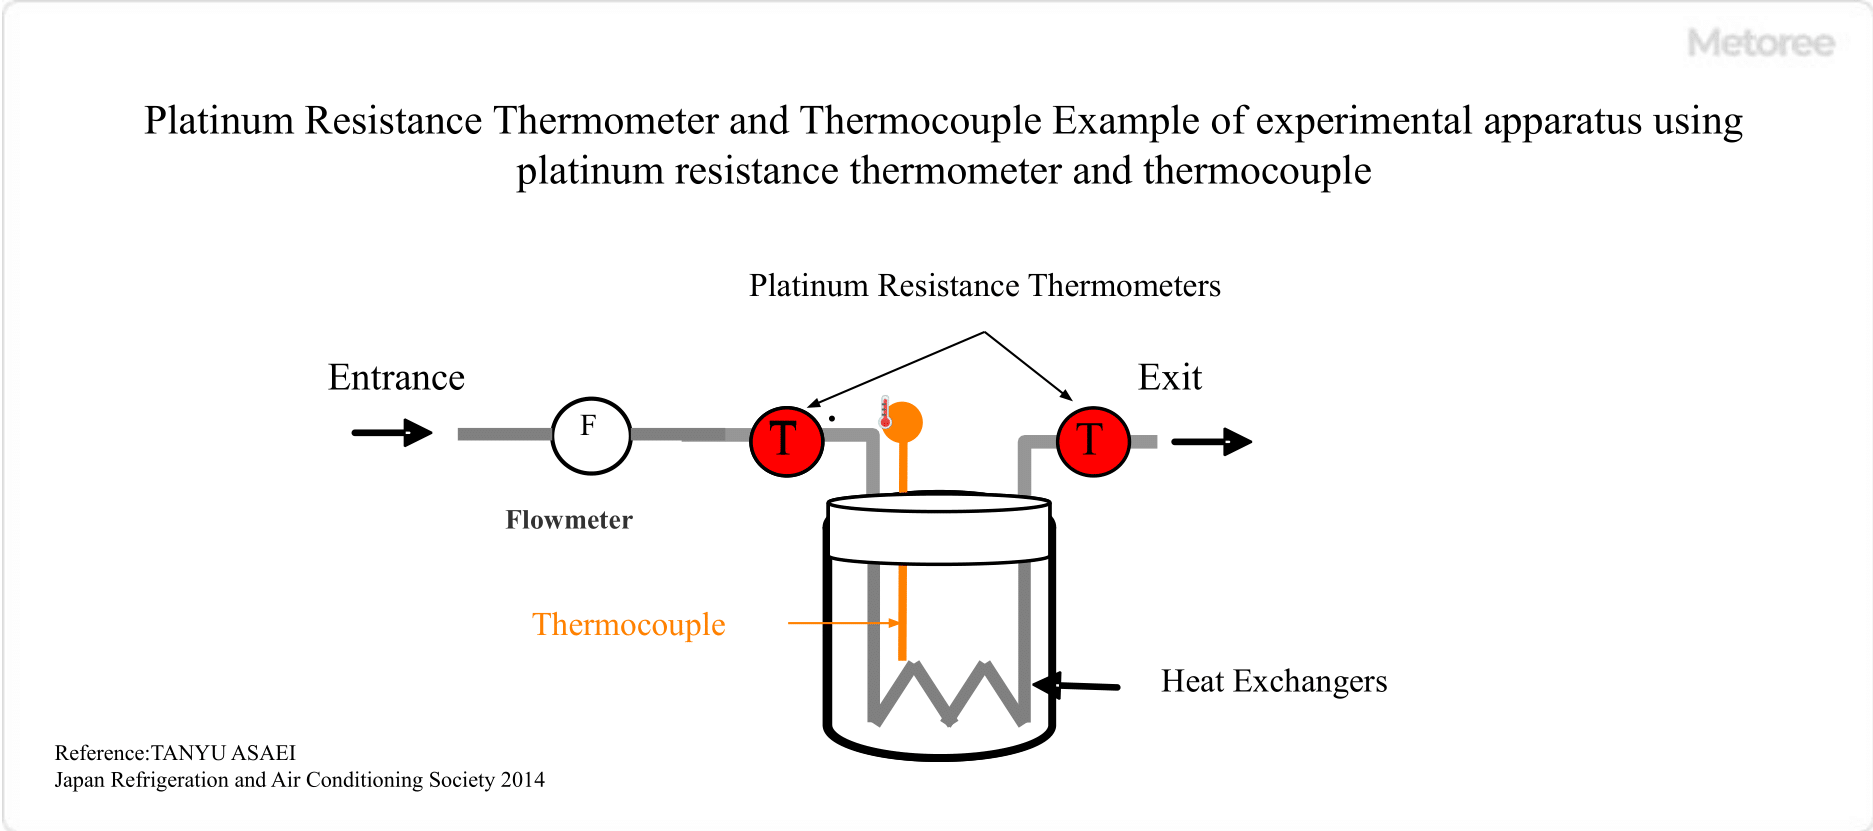 Resistance Temperature Detector - an overview